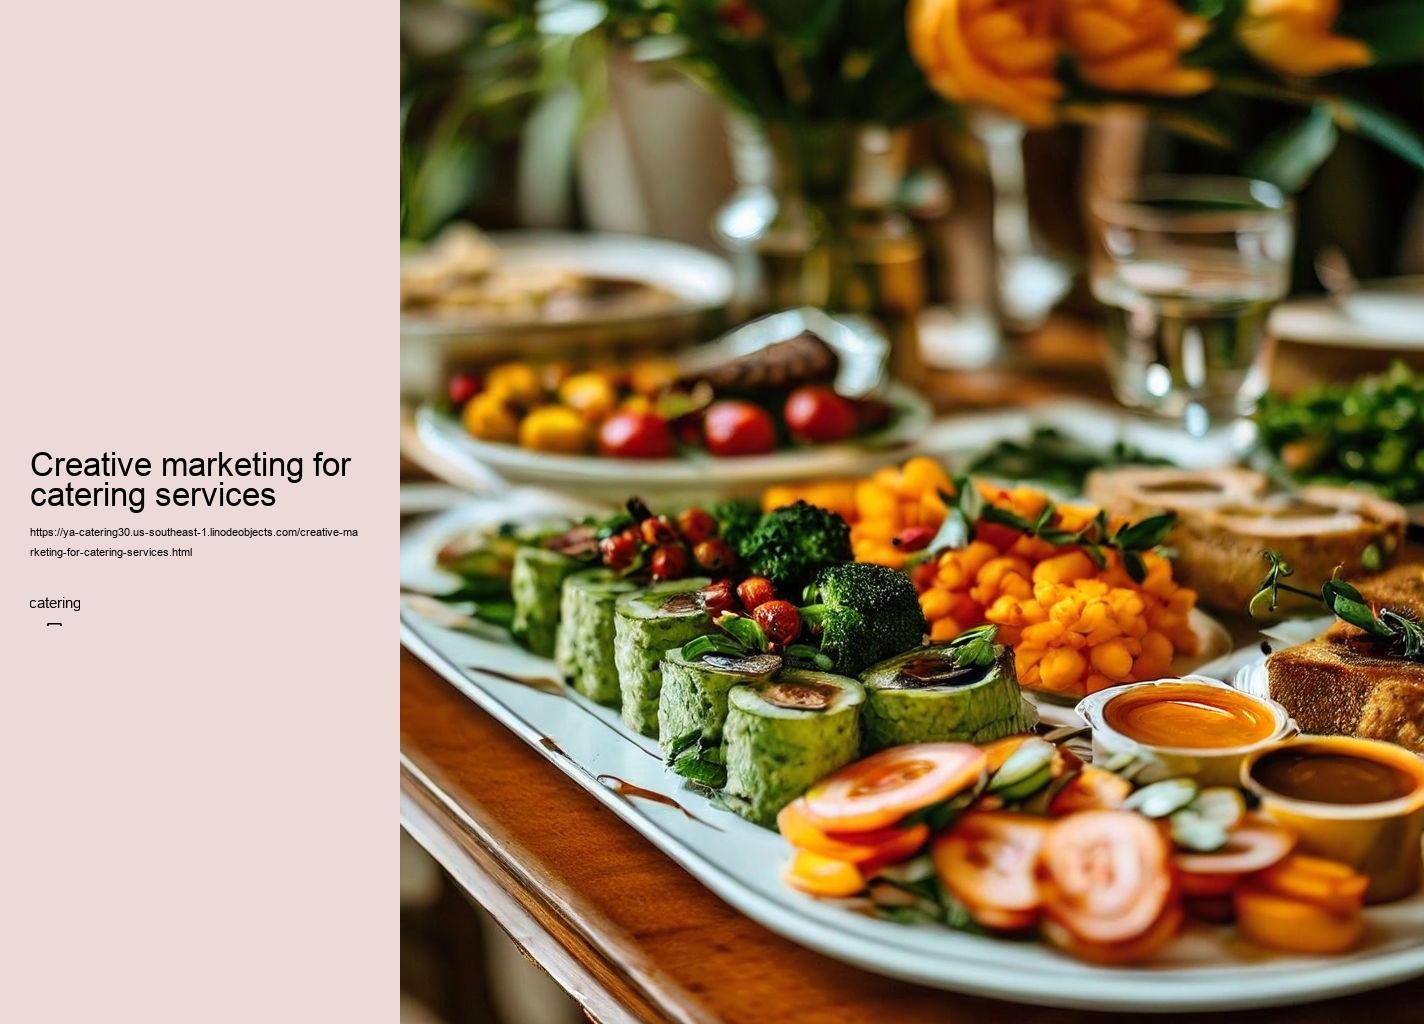 Creative marketing for catering services